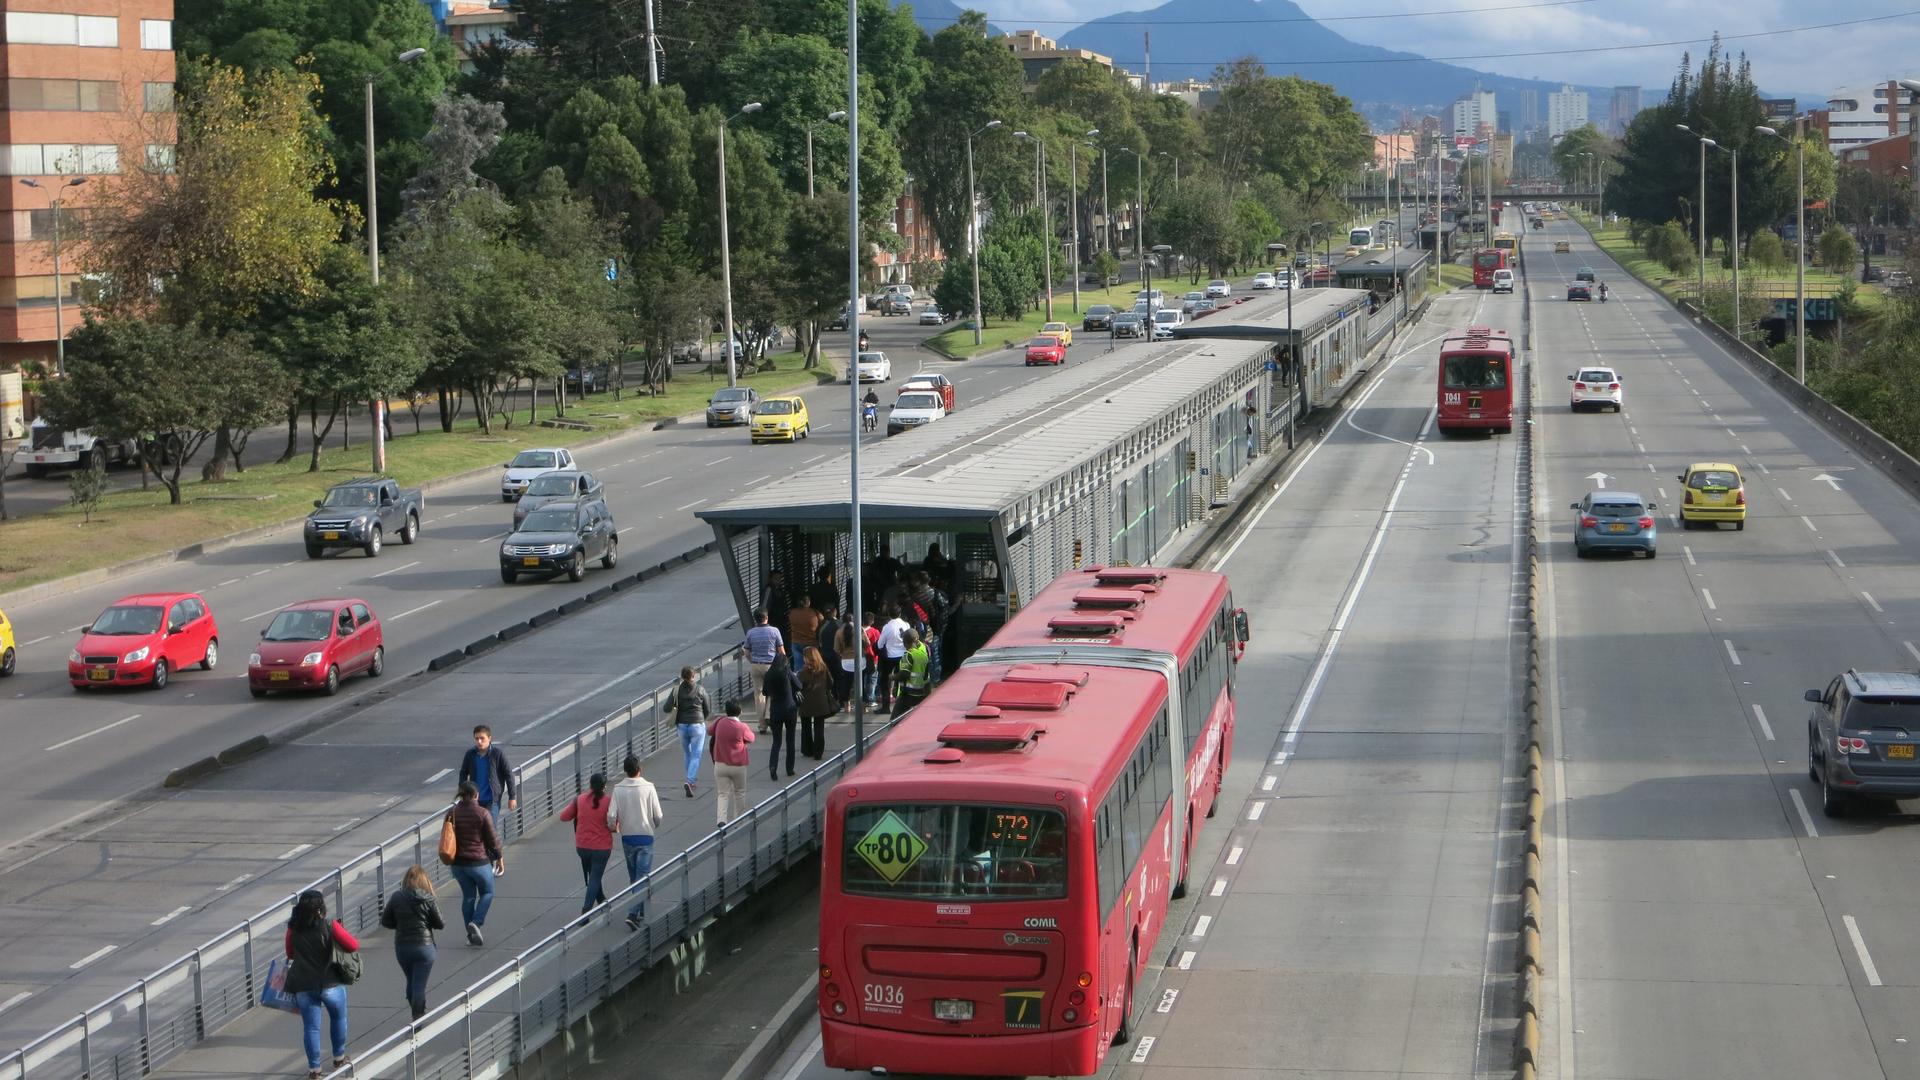 Bogotá's TransMilenio buses began operating in the year 2000.It’s the largest bus rapid transit system on the planet carrying 2.4 million passengers daily.  